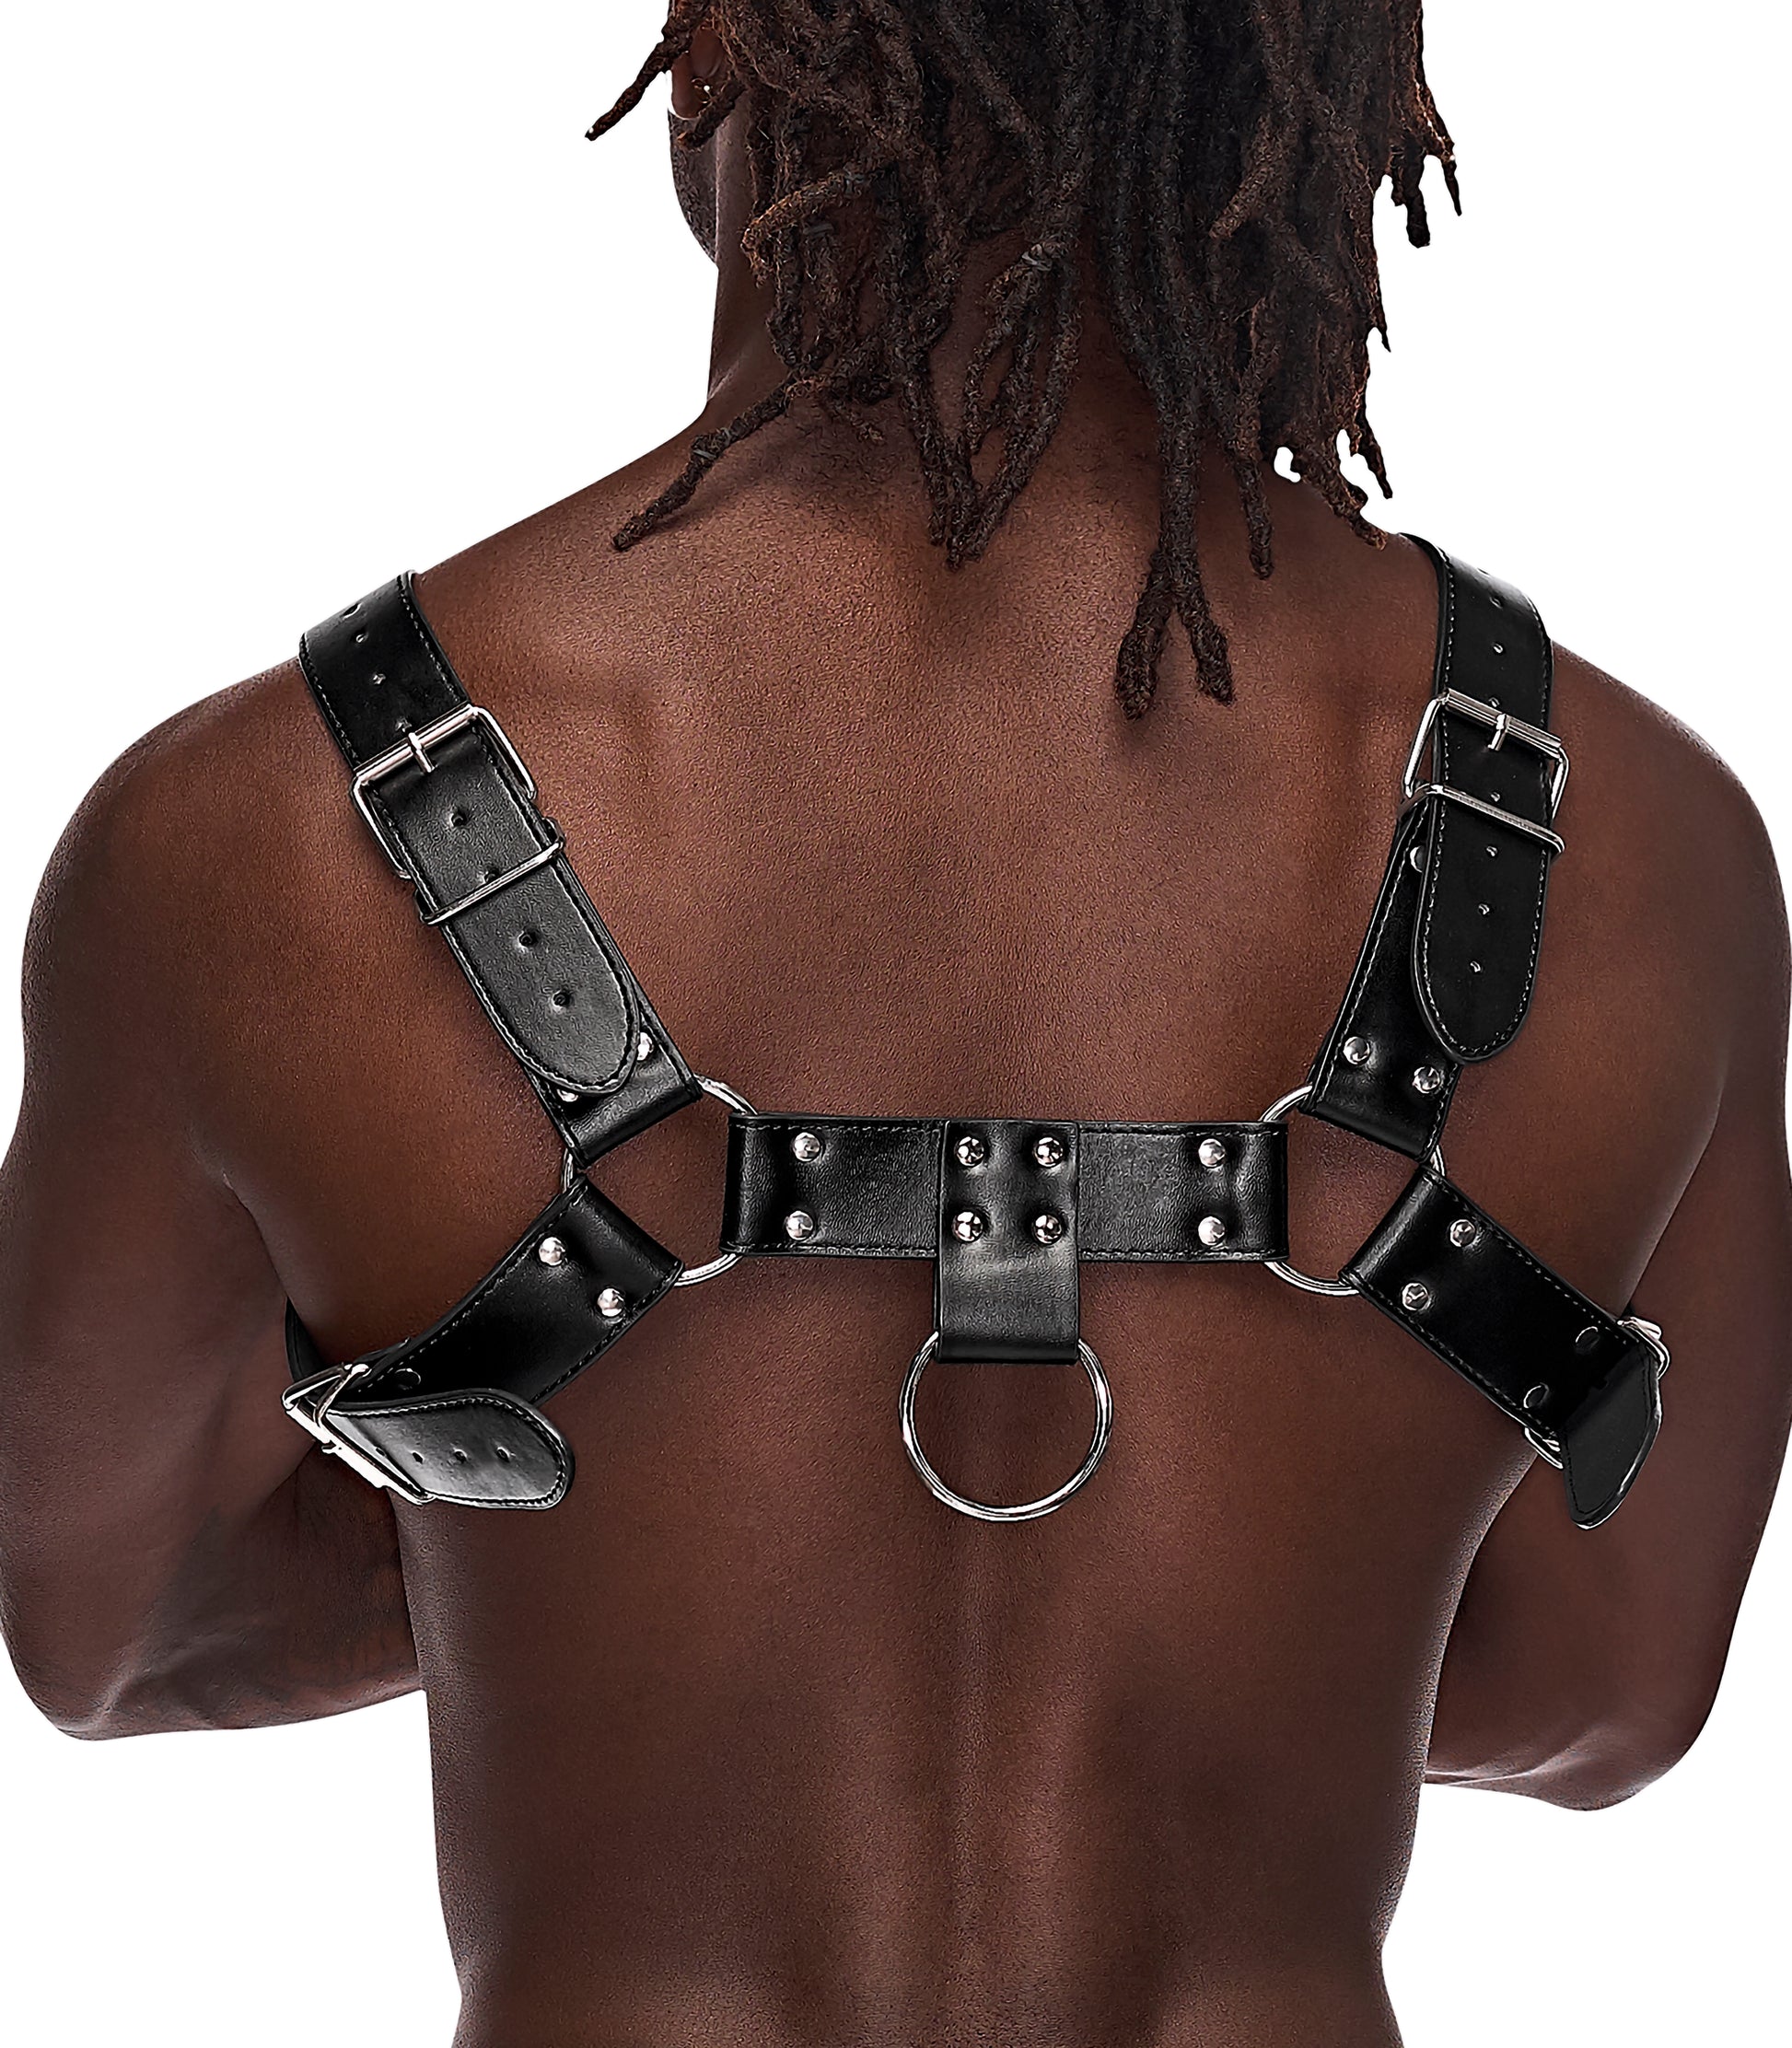 Male-Power-Aries-Harness-Back-Details